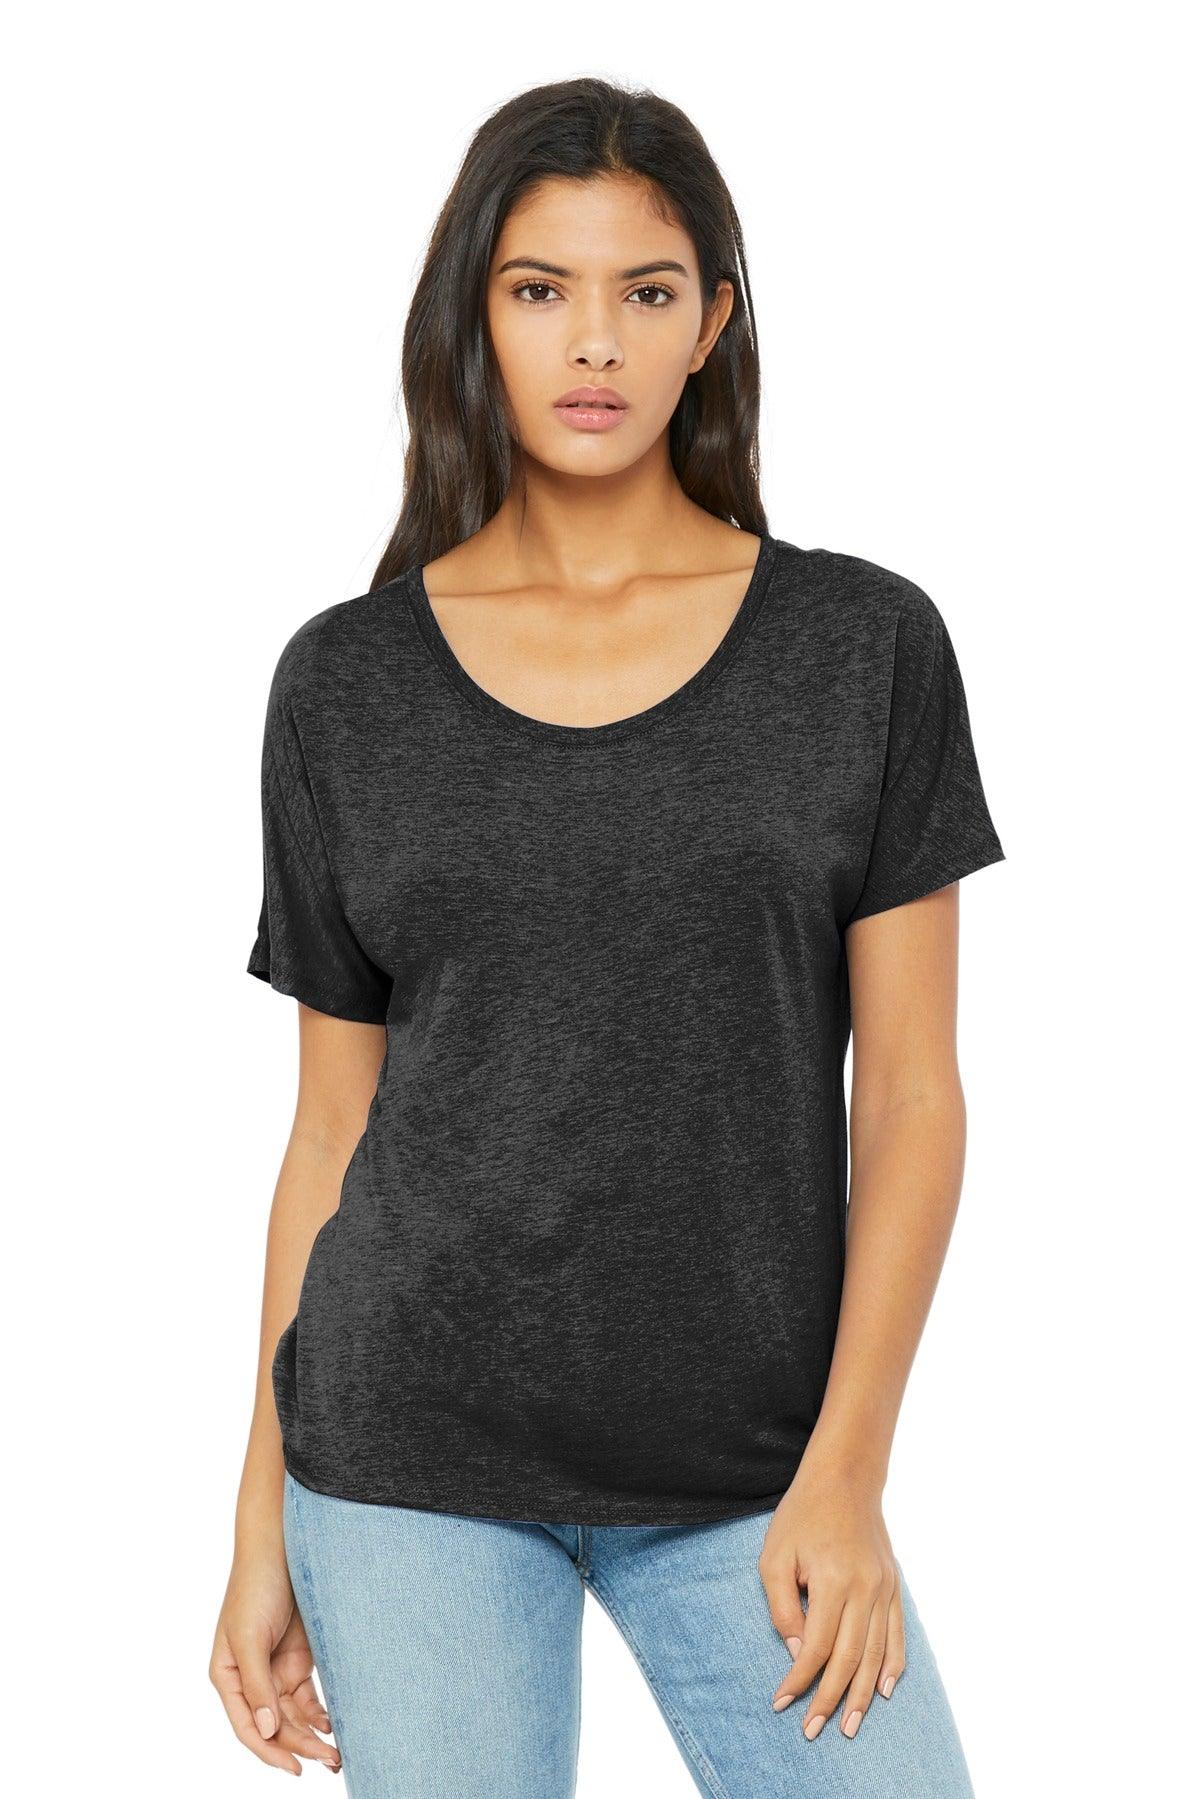 BELLA+CANVAS Women's Slouchy Tee. BC8816 - Dresses Max